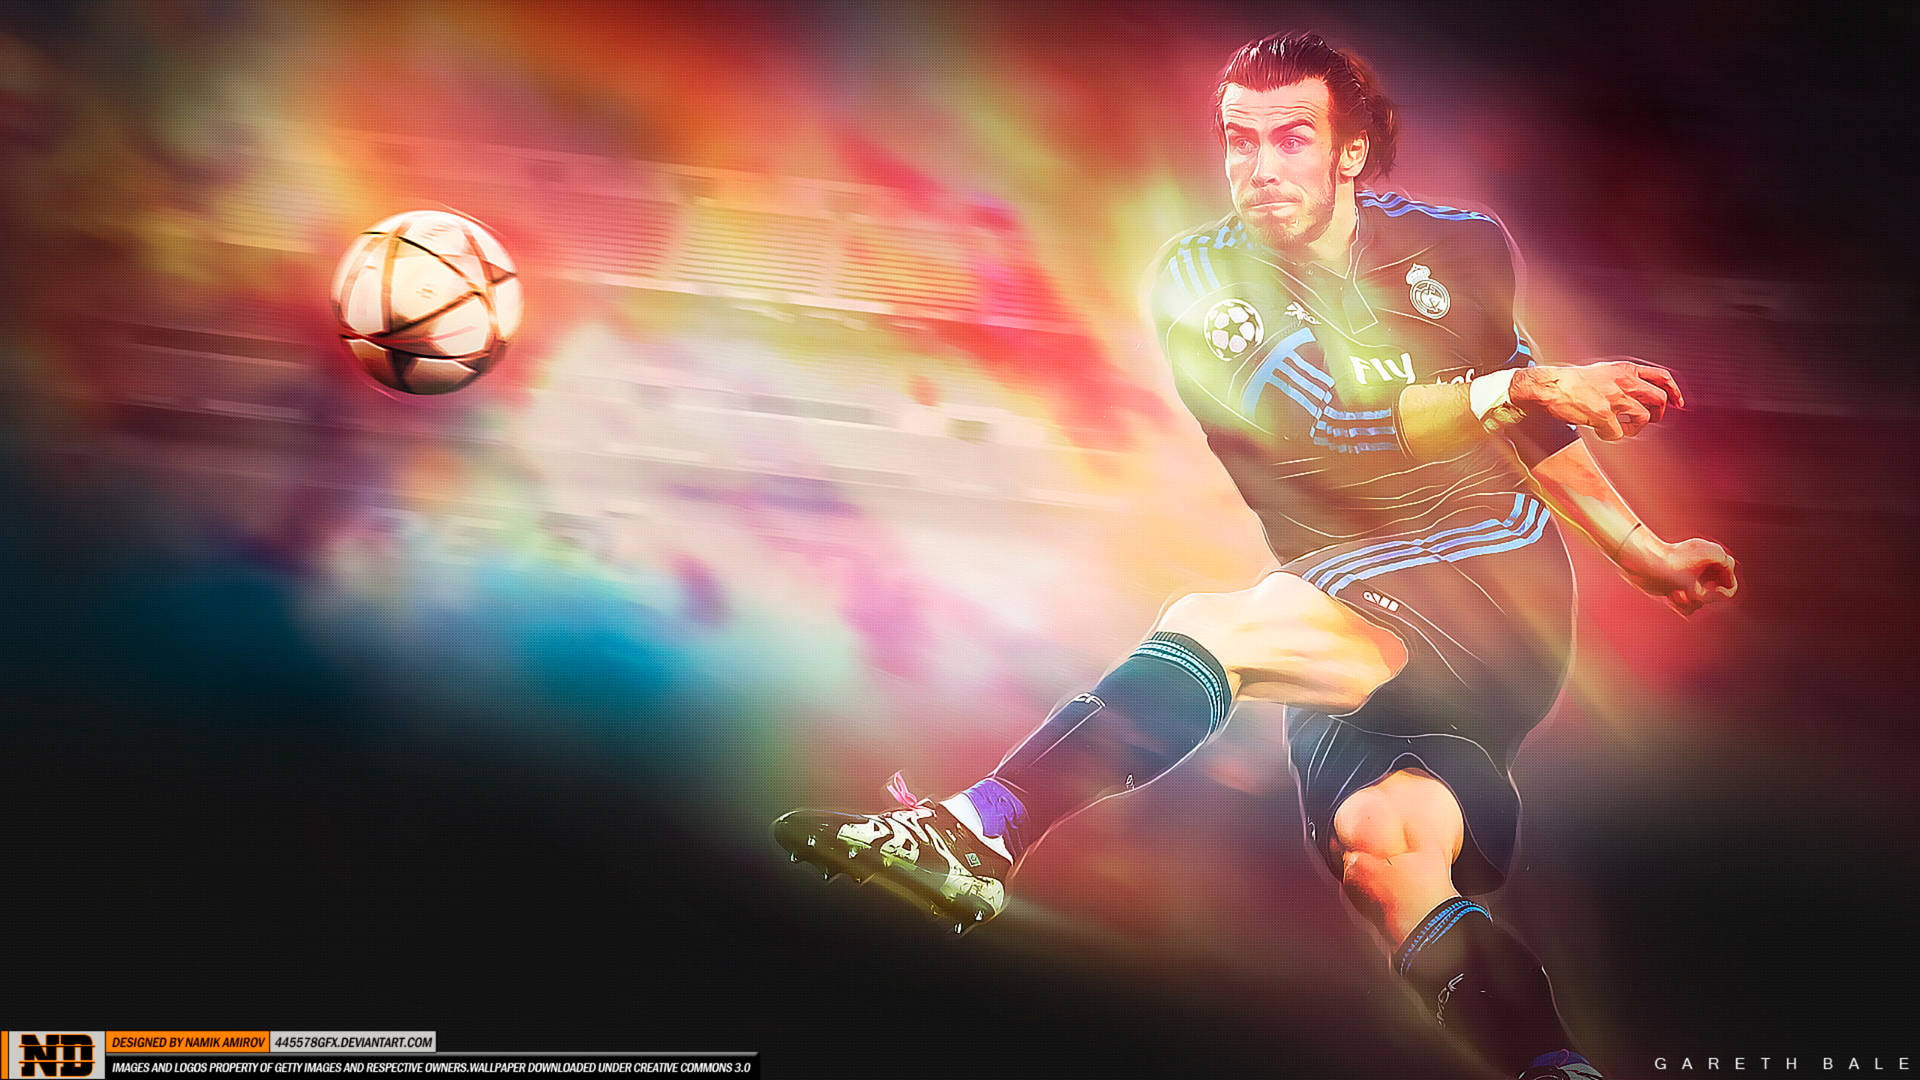 Gareth Bale In Multicolored Aesthetic Background